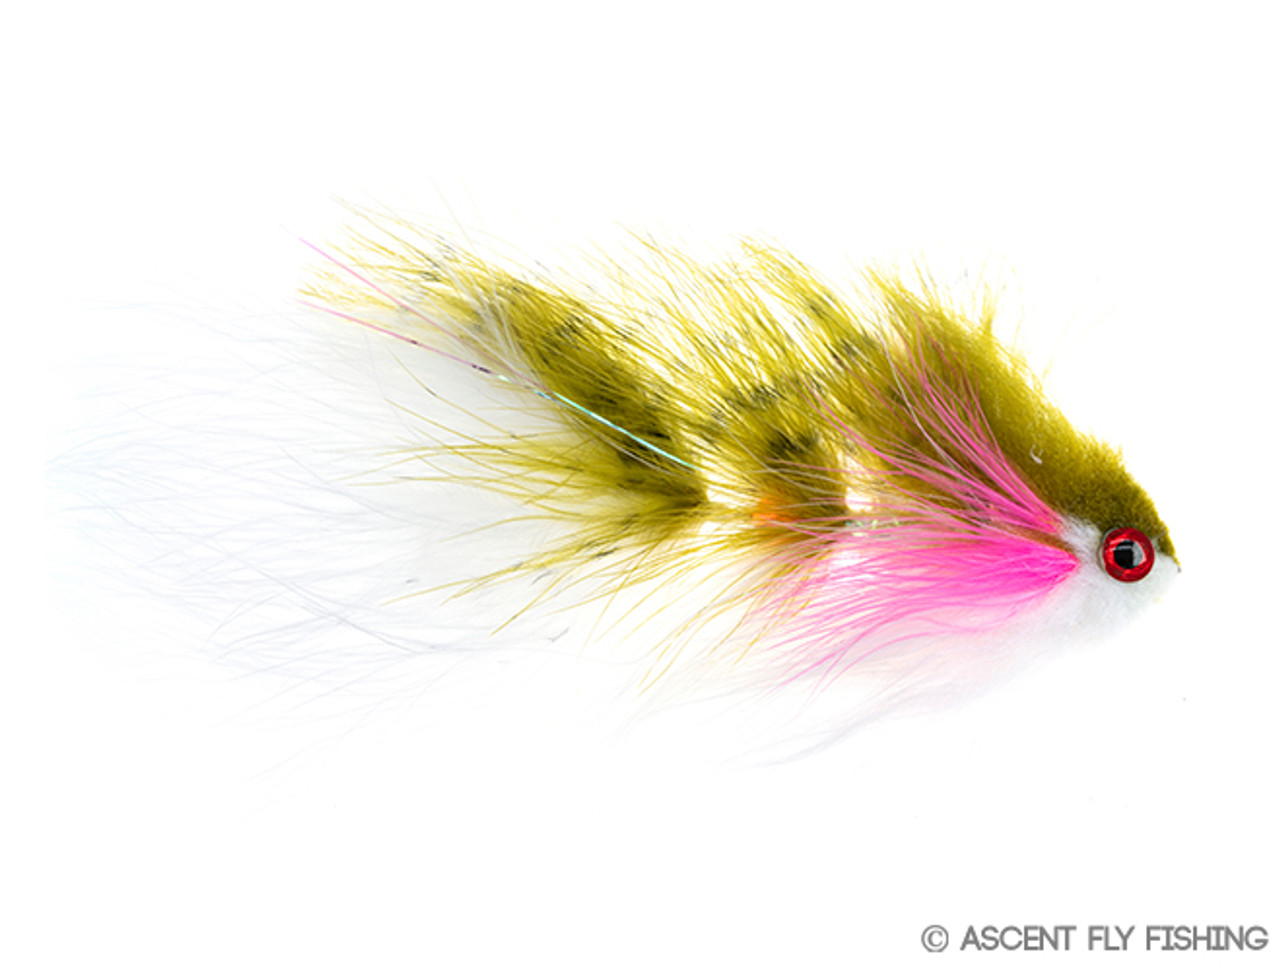 T & A Bunker - Ascent Fly Fishing